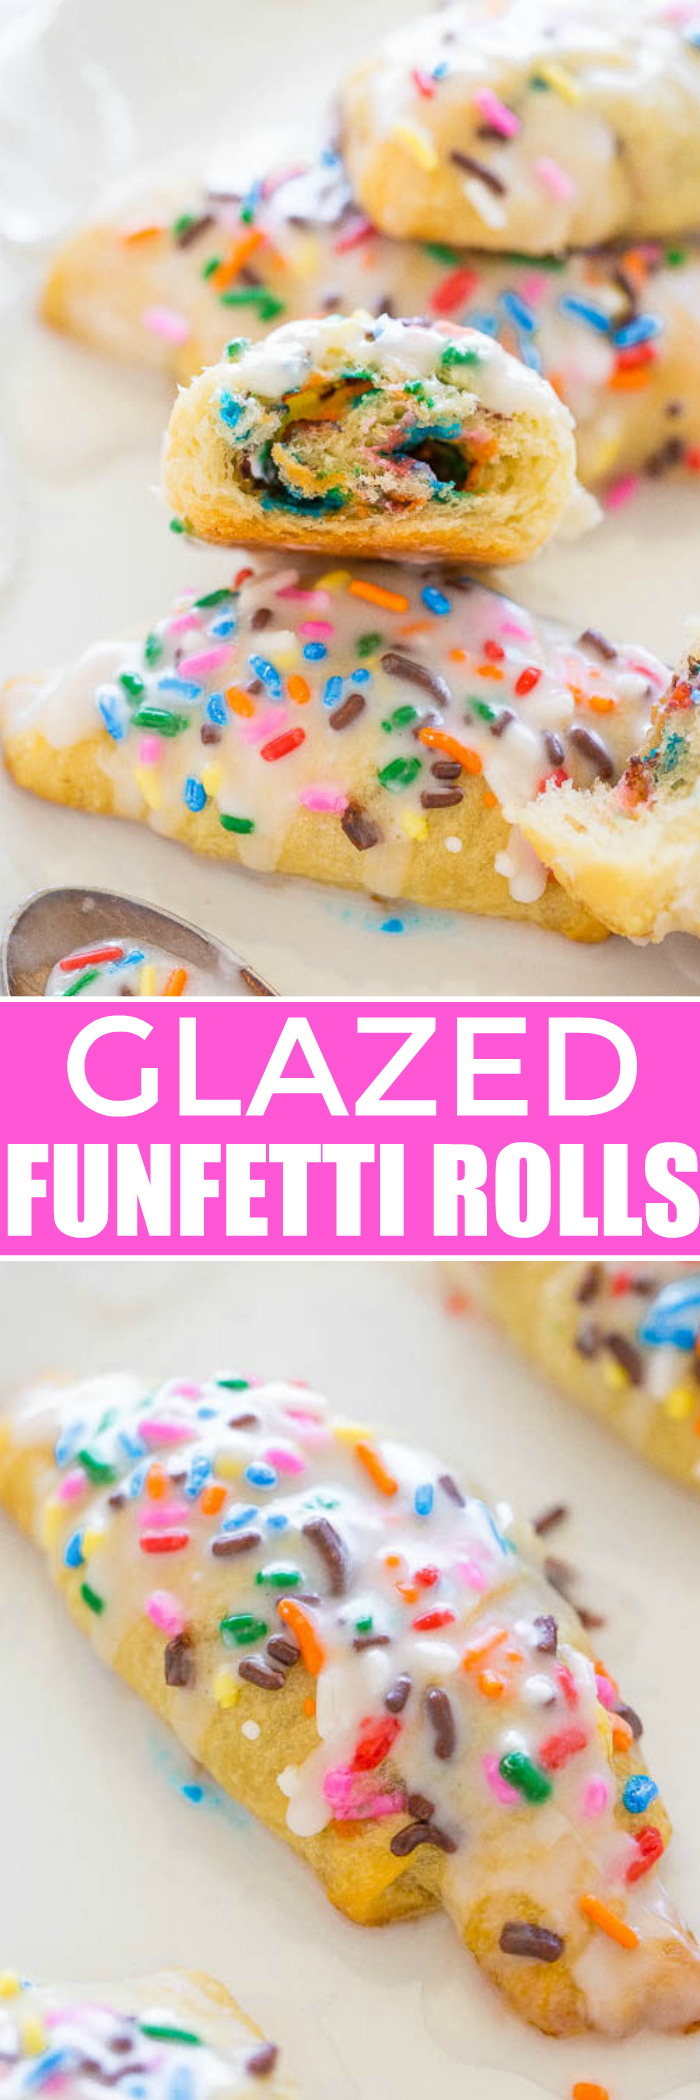 Glazed Funfetti Rolls - Jazz up a tube of crescent rolls with this EASY treat that's ready in 15 minutes!! Soft, buttery, loaded with SPRINKLES and glazed to sweet perfection!!